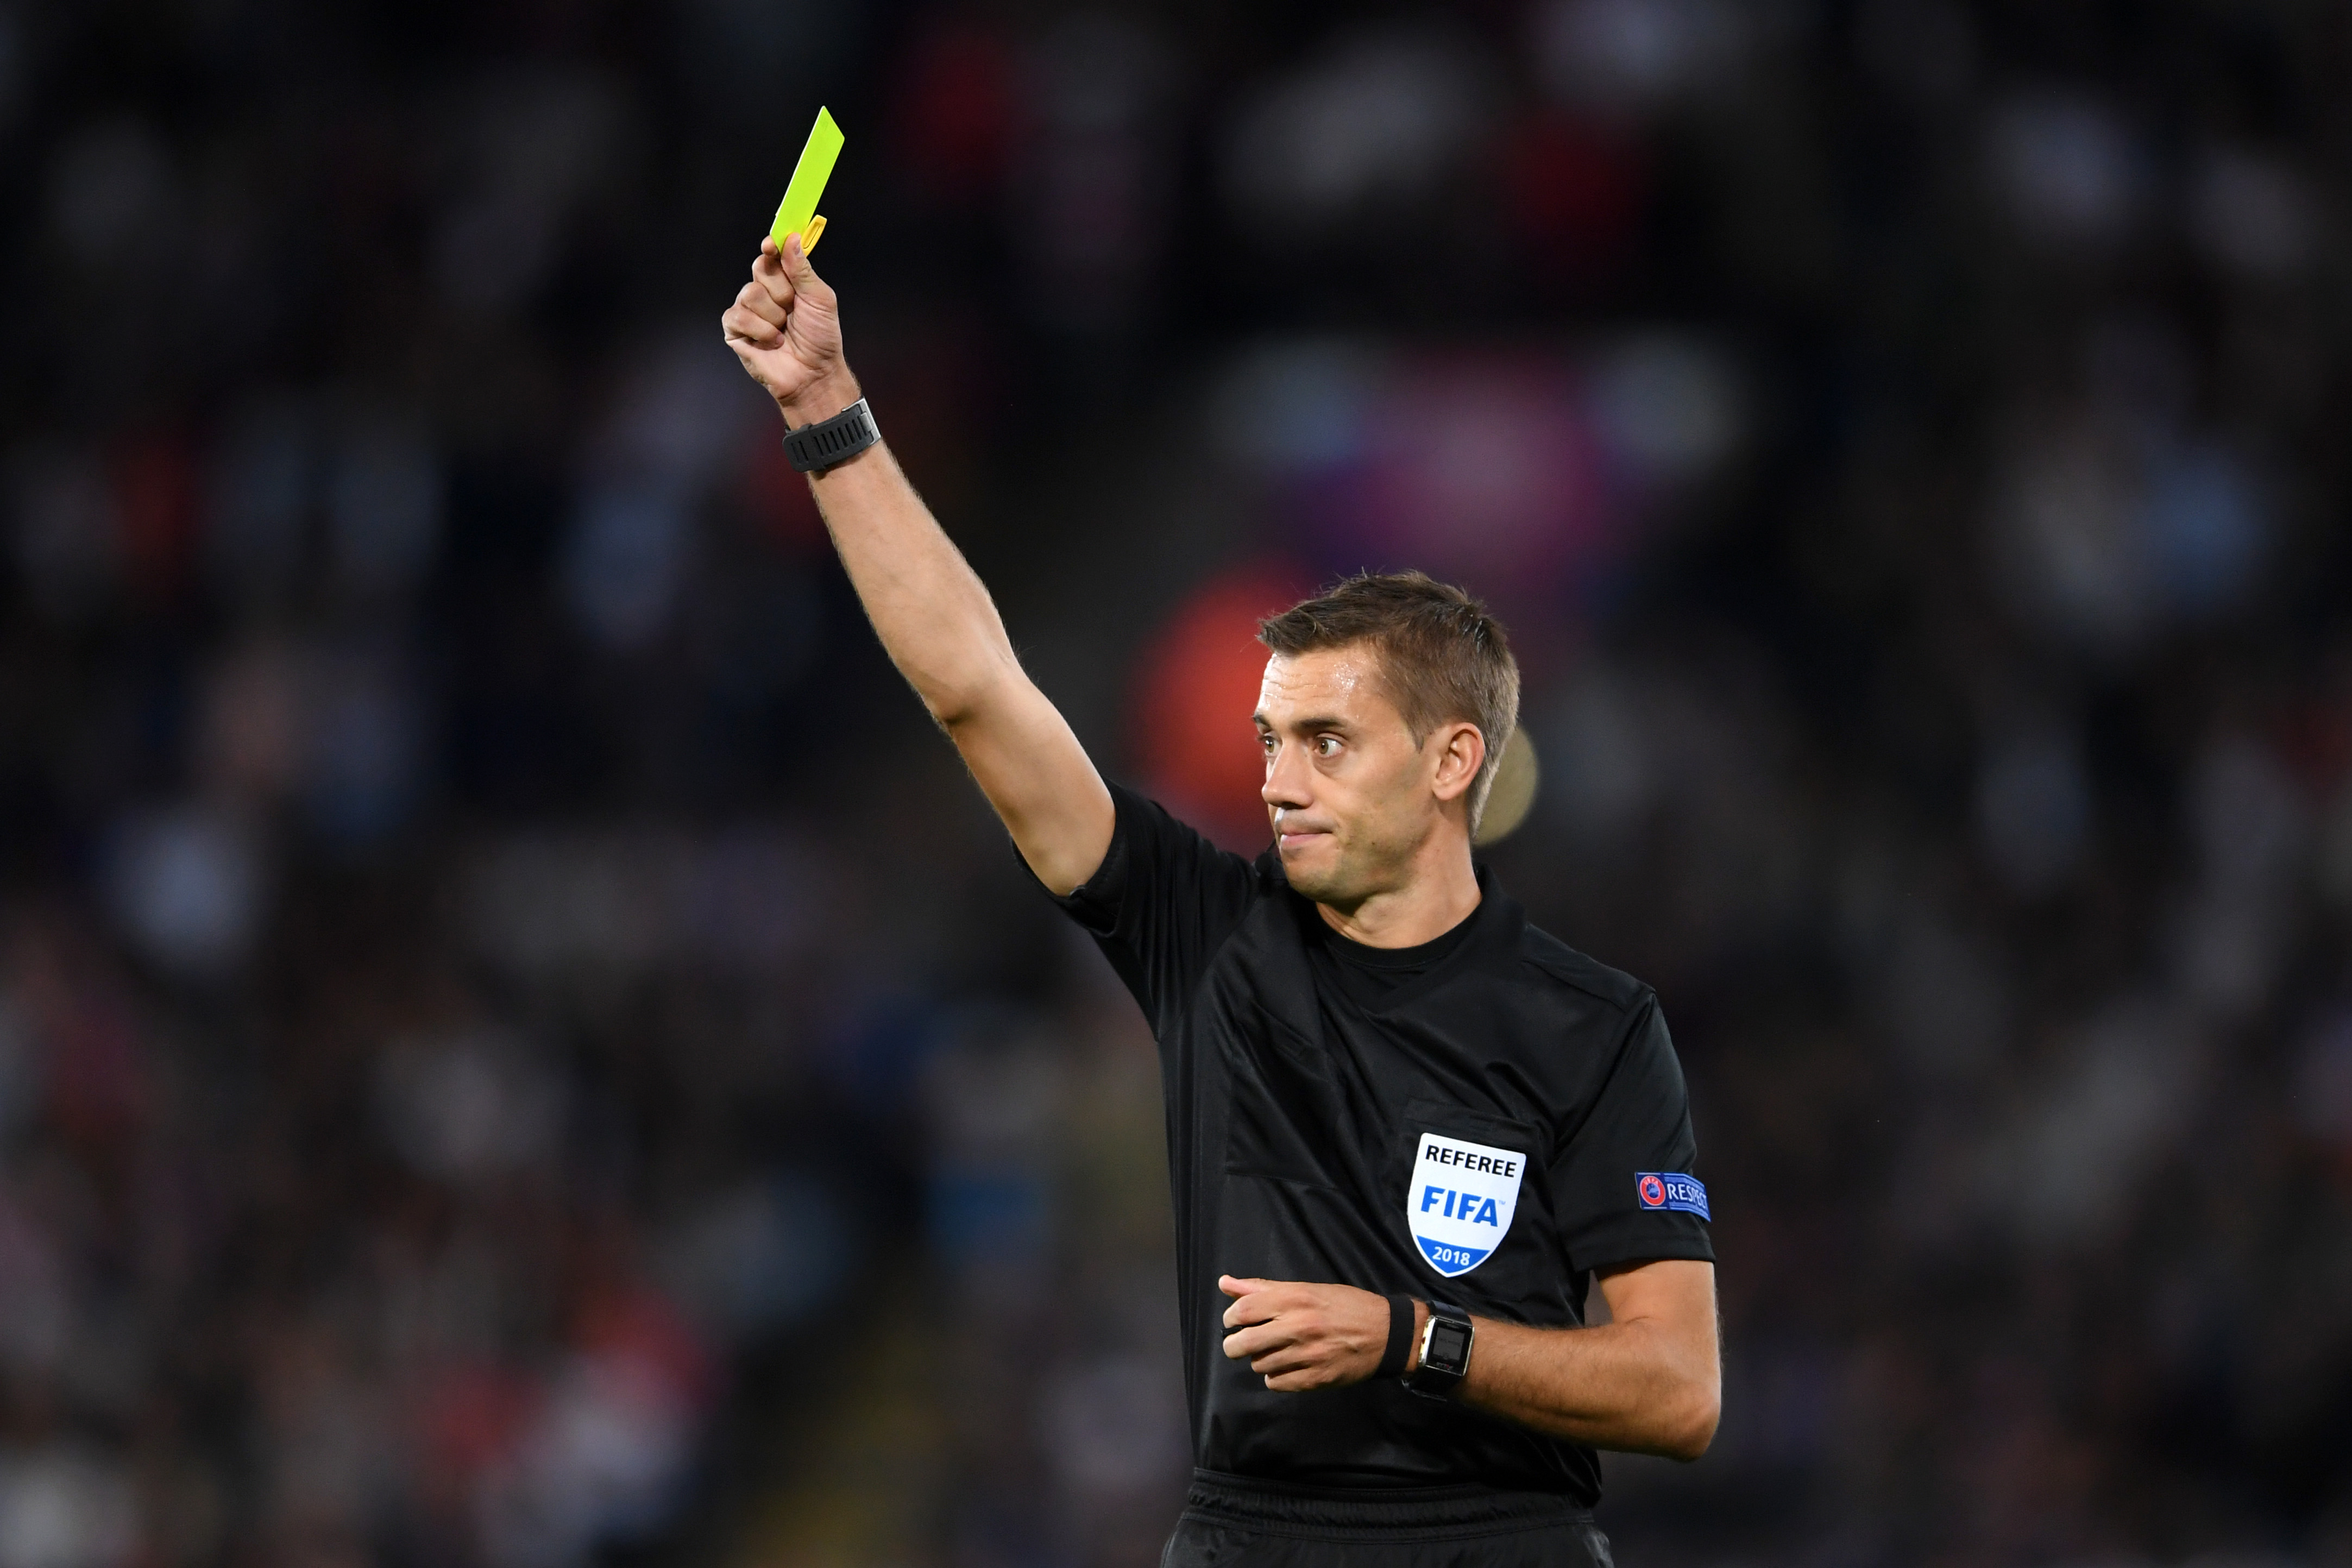 LEICESTER, ENGLAND - SEPTEMBER 11:  Referee Clément Turpin shows a yellow card during the international friendly match between England and Switzerland at The King Power Stadium on September 11, 2018 in Leicester, United Kingdom.  (Photo by Laurence Griffiths/Getty Images)